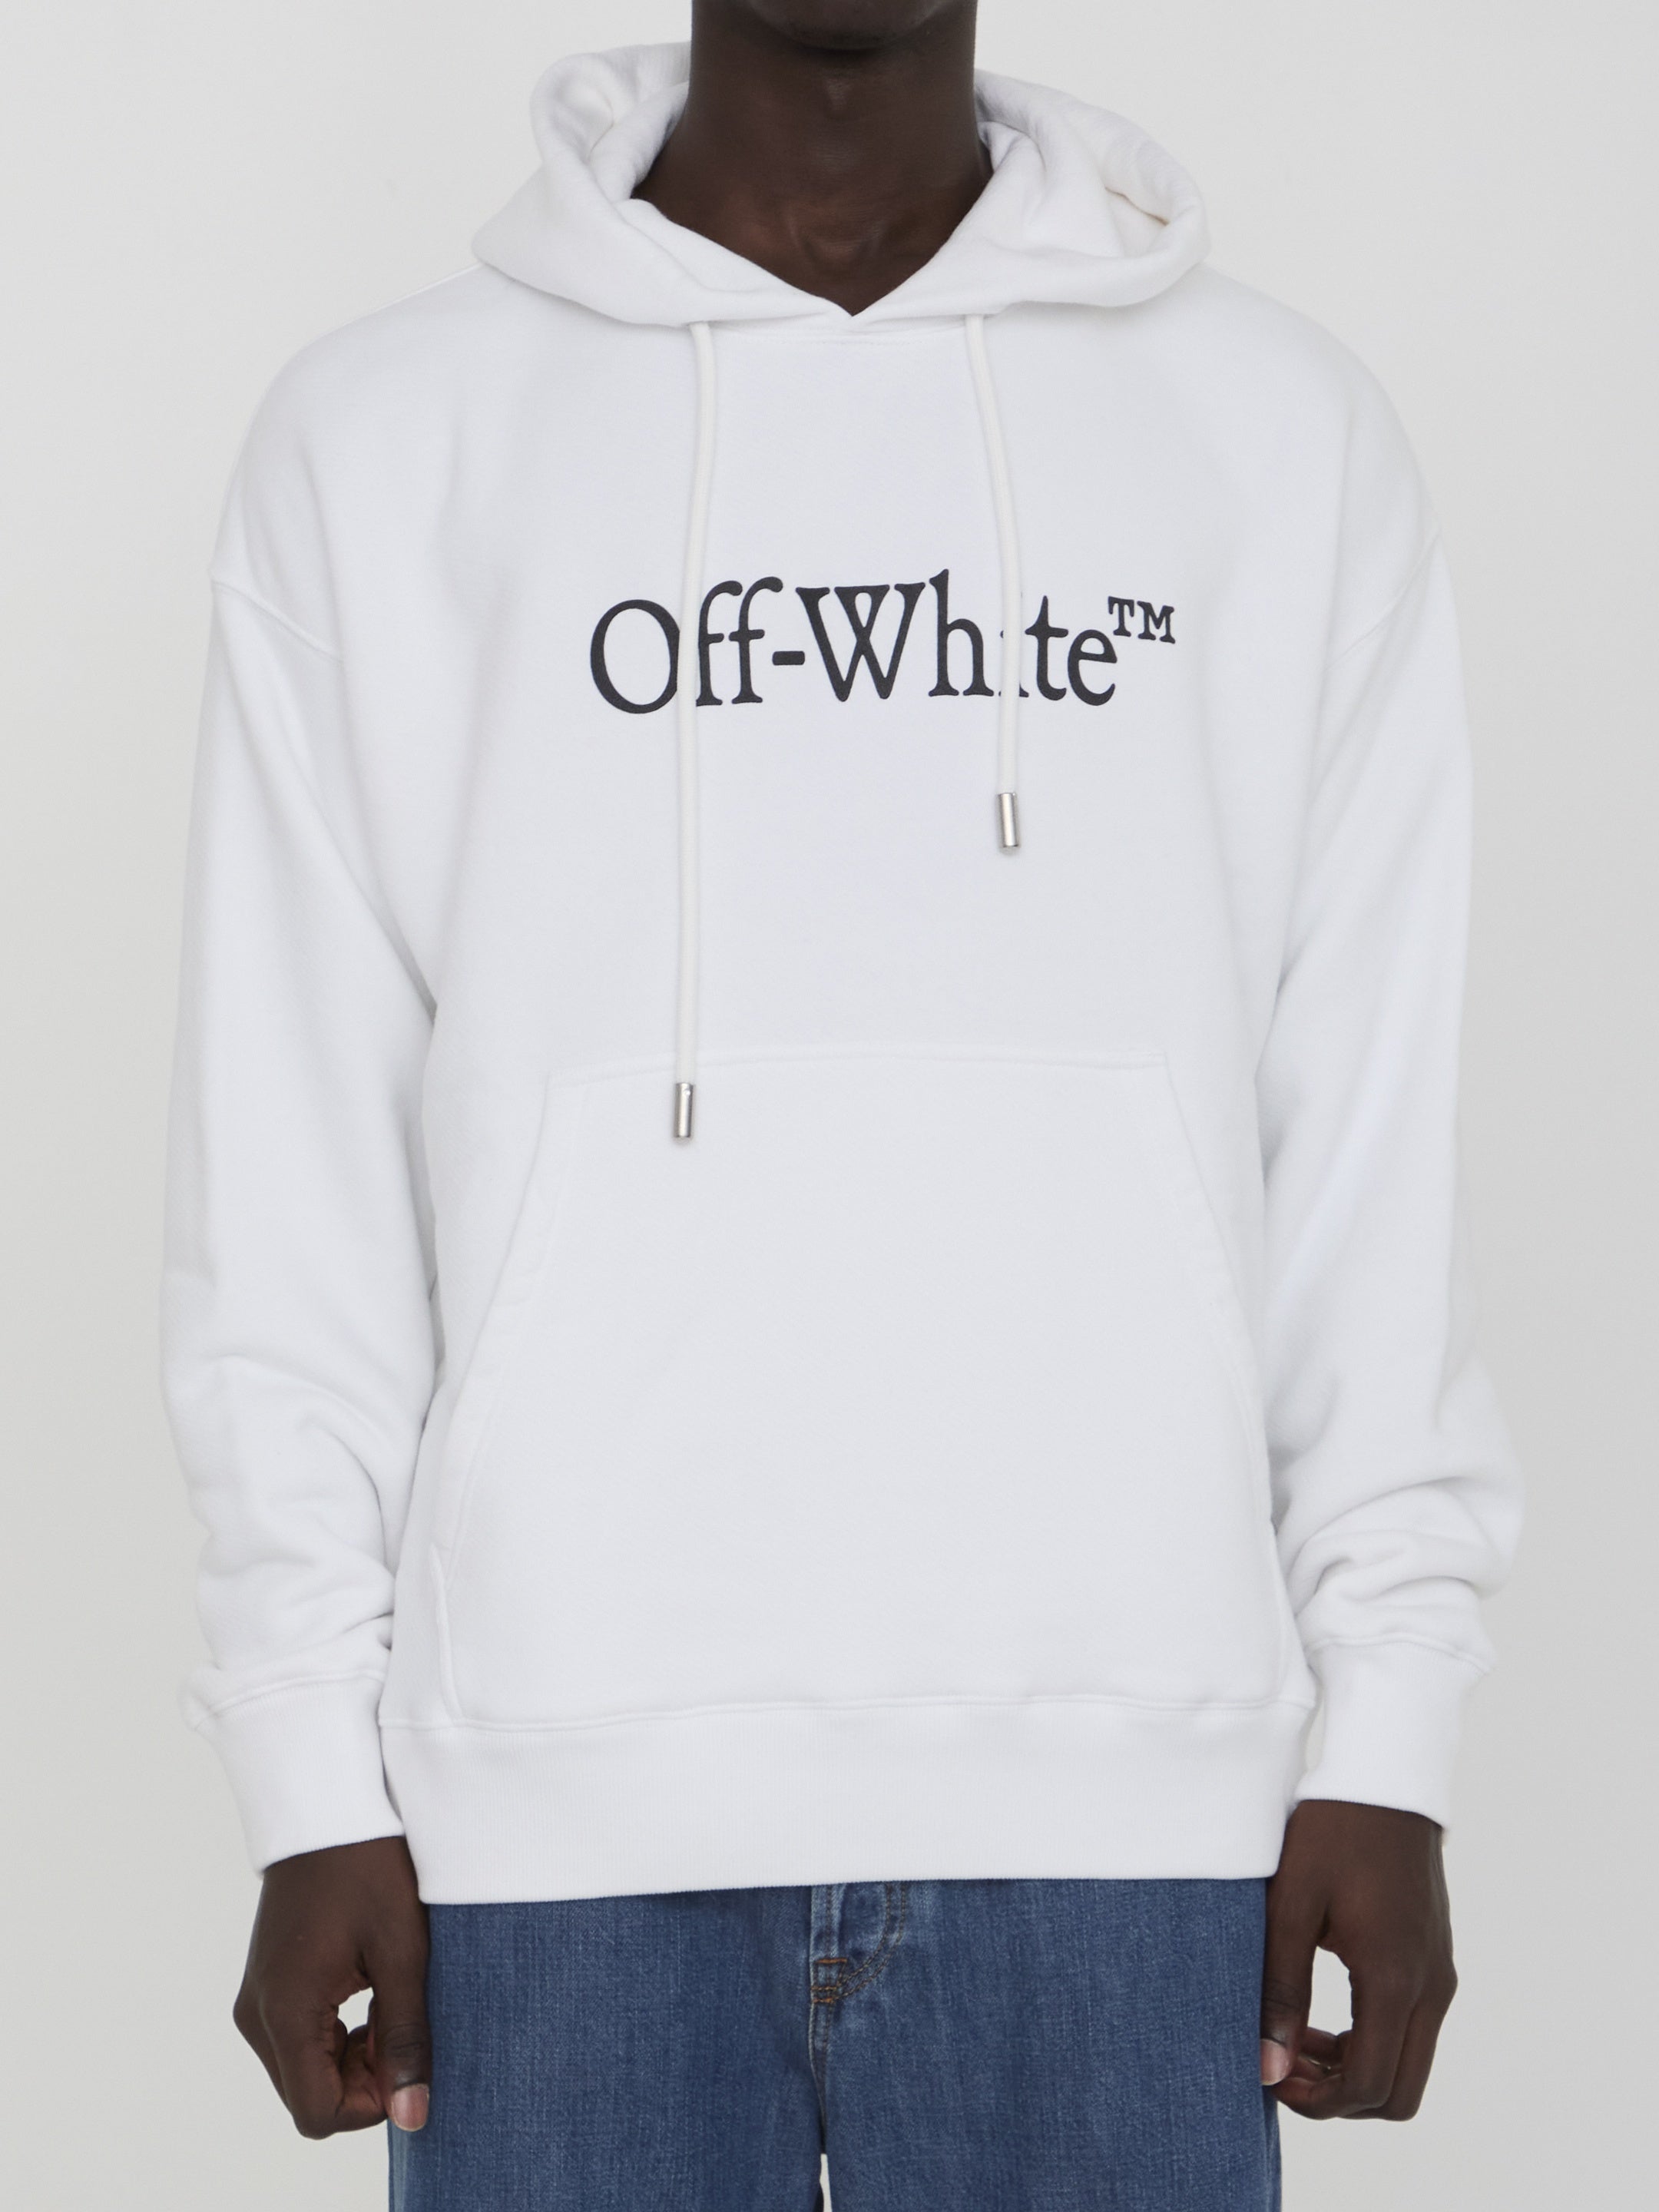 OFF-WHITE-OUTLET-SALE-Big-Bookish-Skate-hoodie-Strick-L-WHITE-ARCHIVE-COLLECTION.jpg